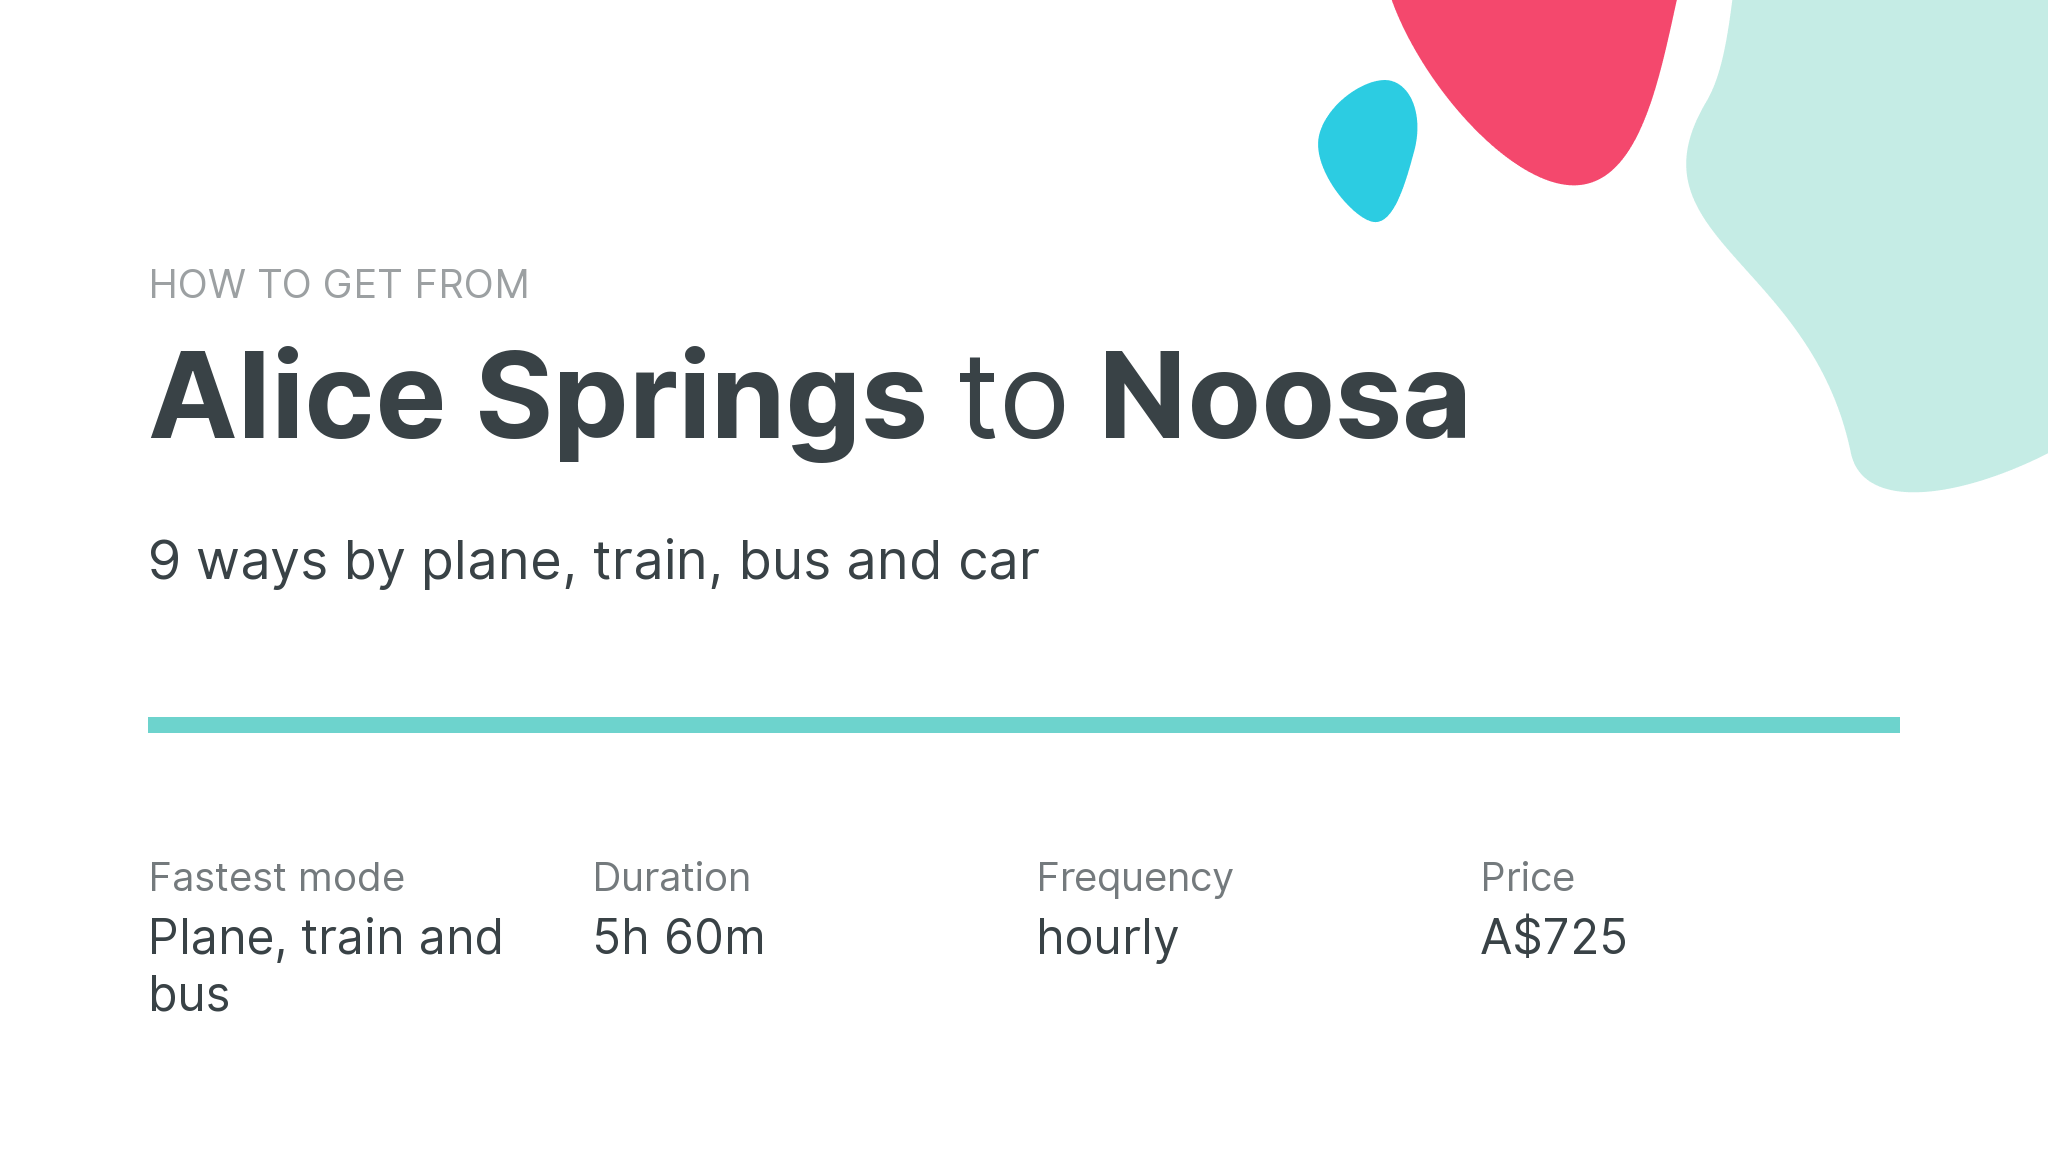 How do I get from Alice Springs to Noosa